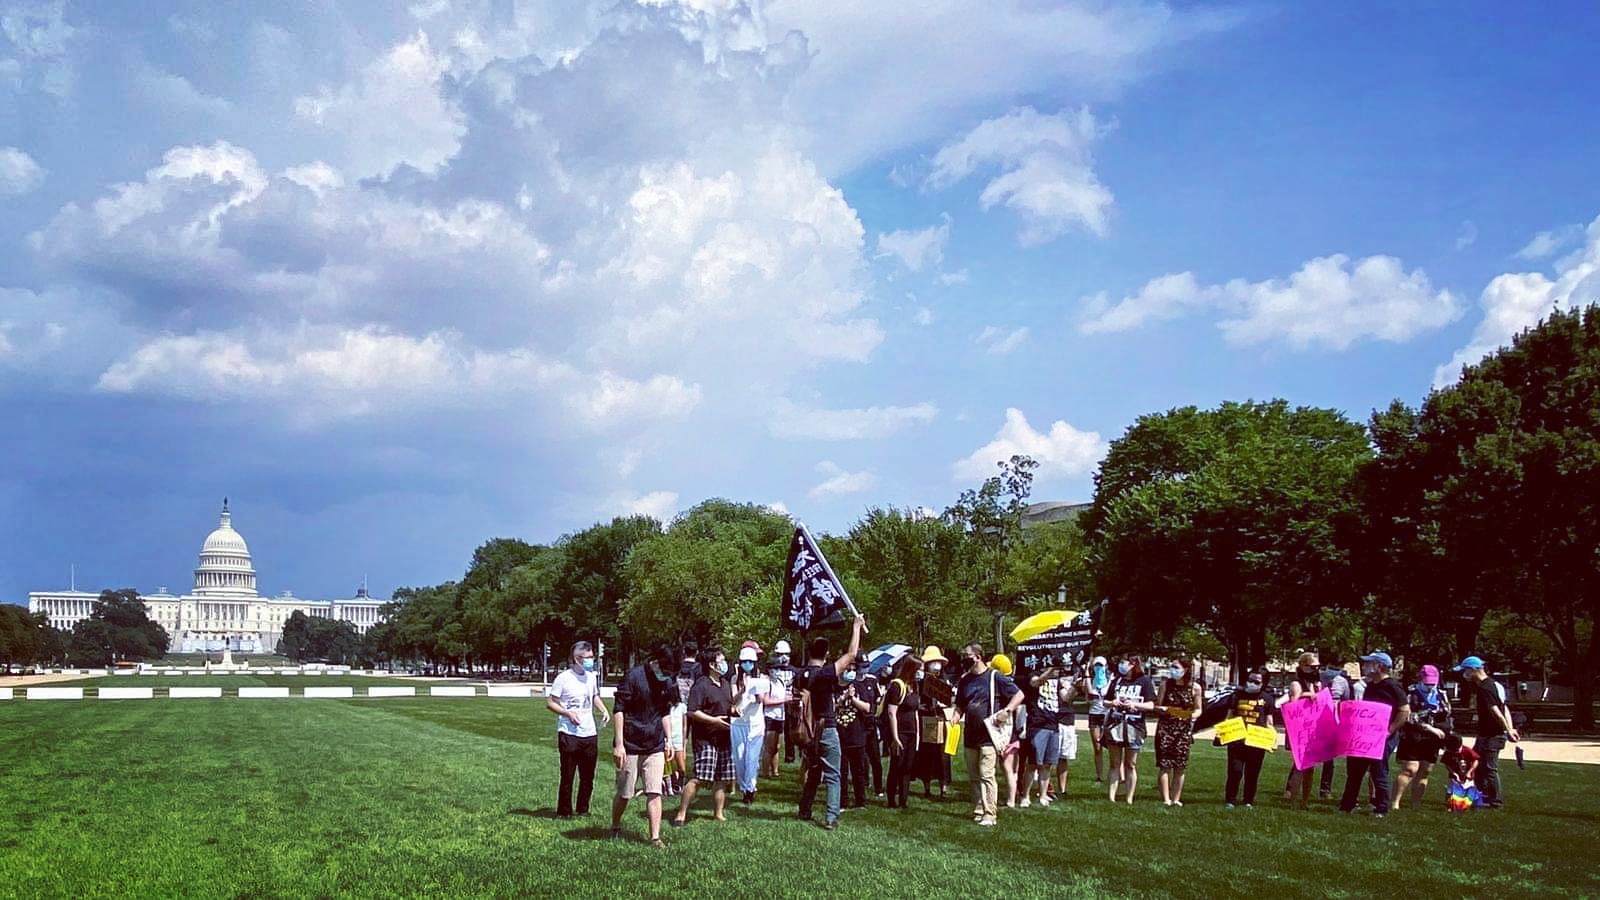 Activists rally support for the Hong Kong Safe Harbor Act on the National Mall in Washington DC on July 5, 2020. Photo via Twitter/dc4_hk